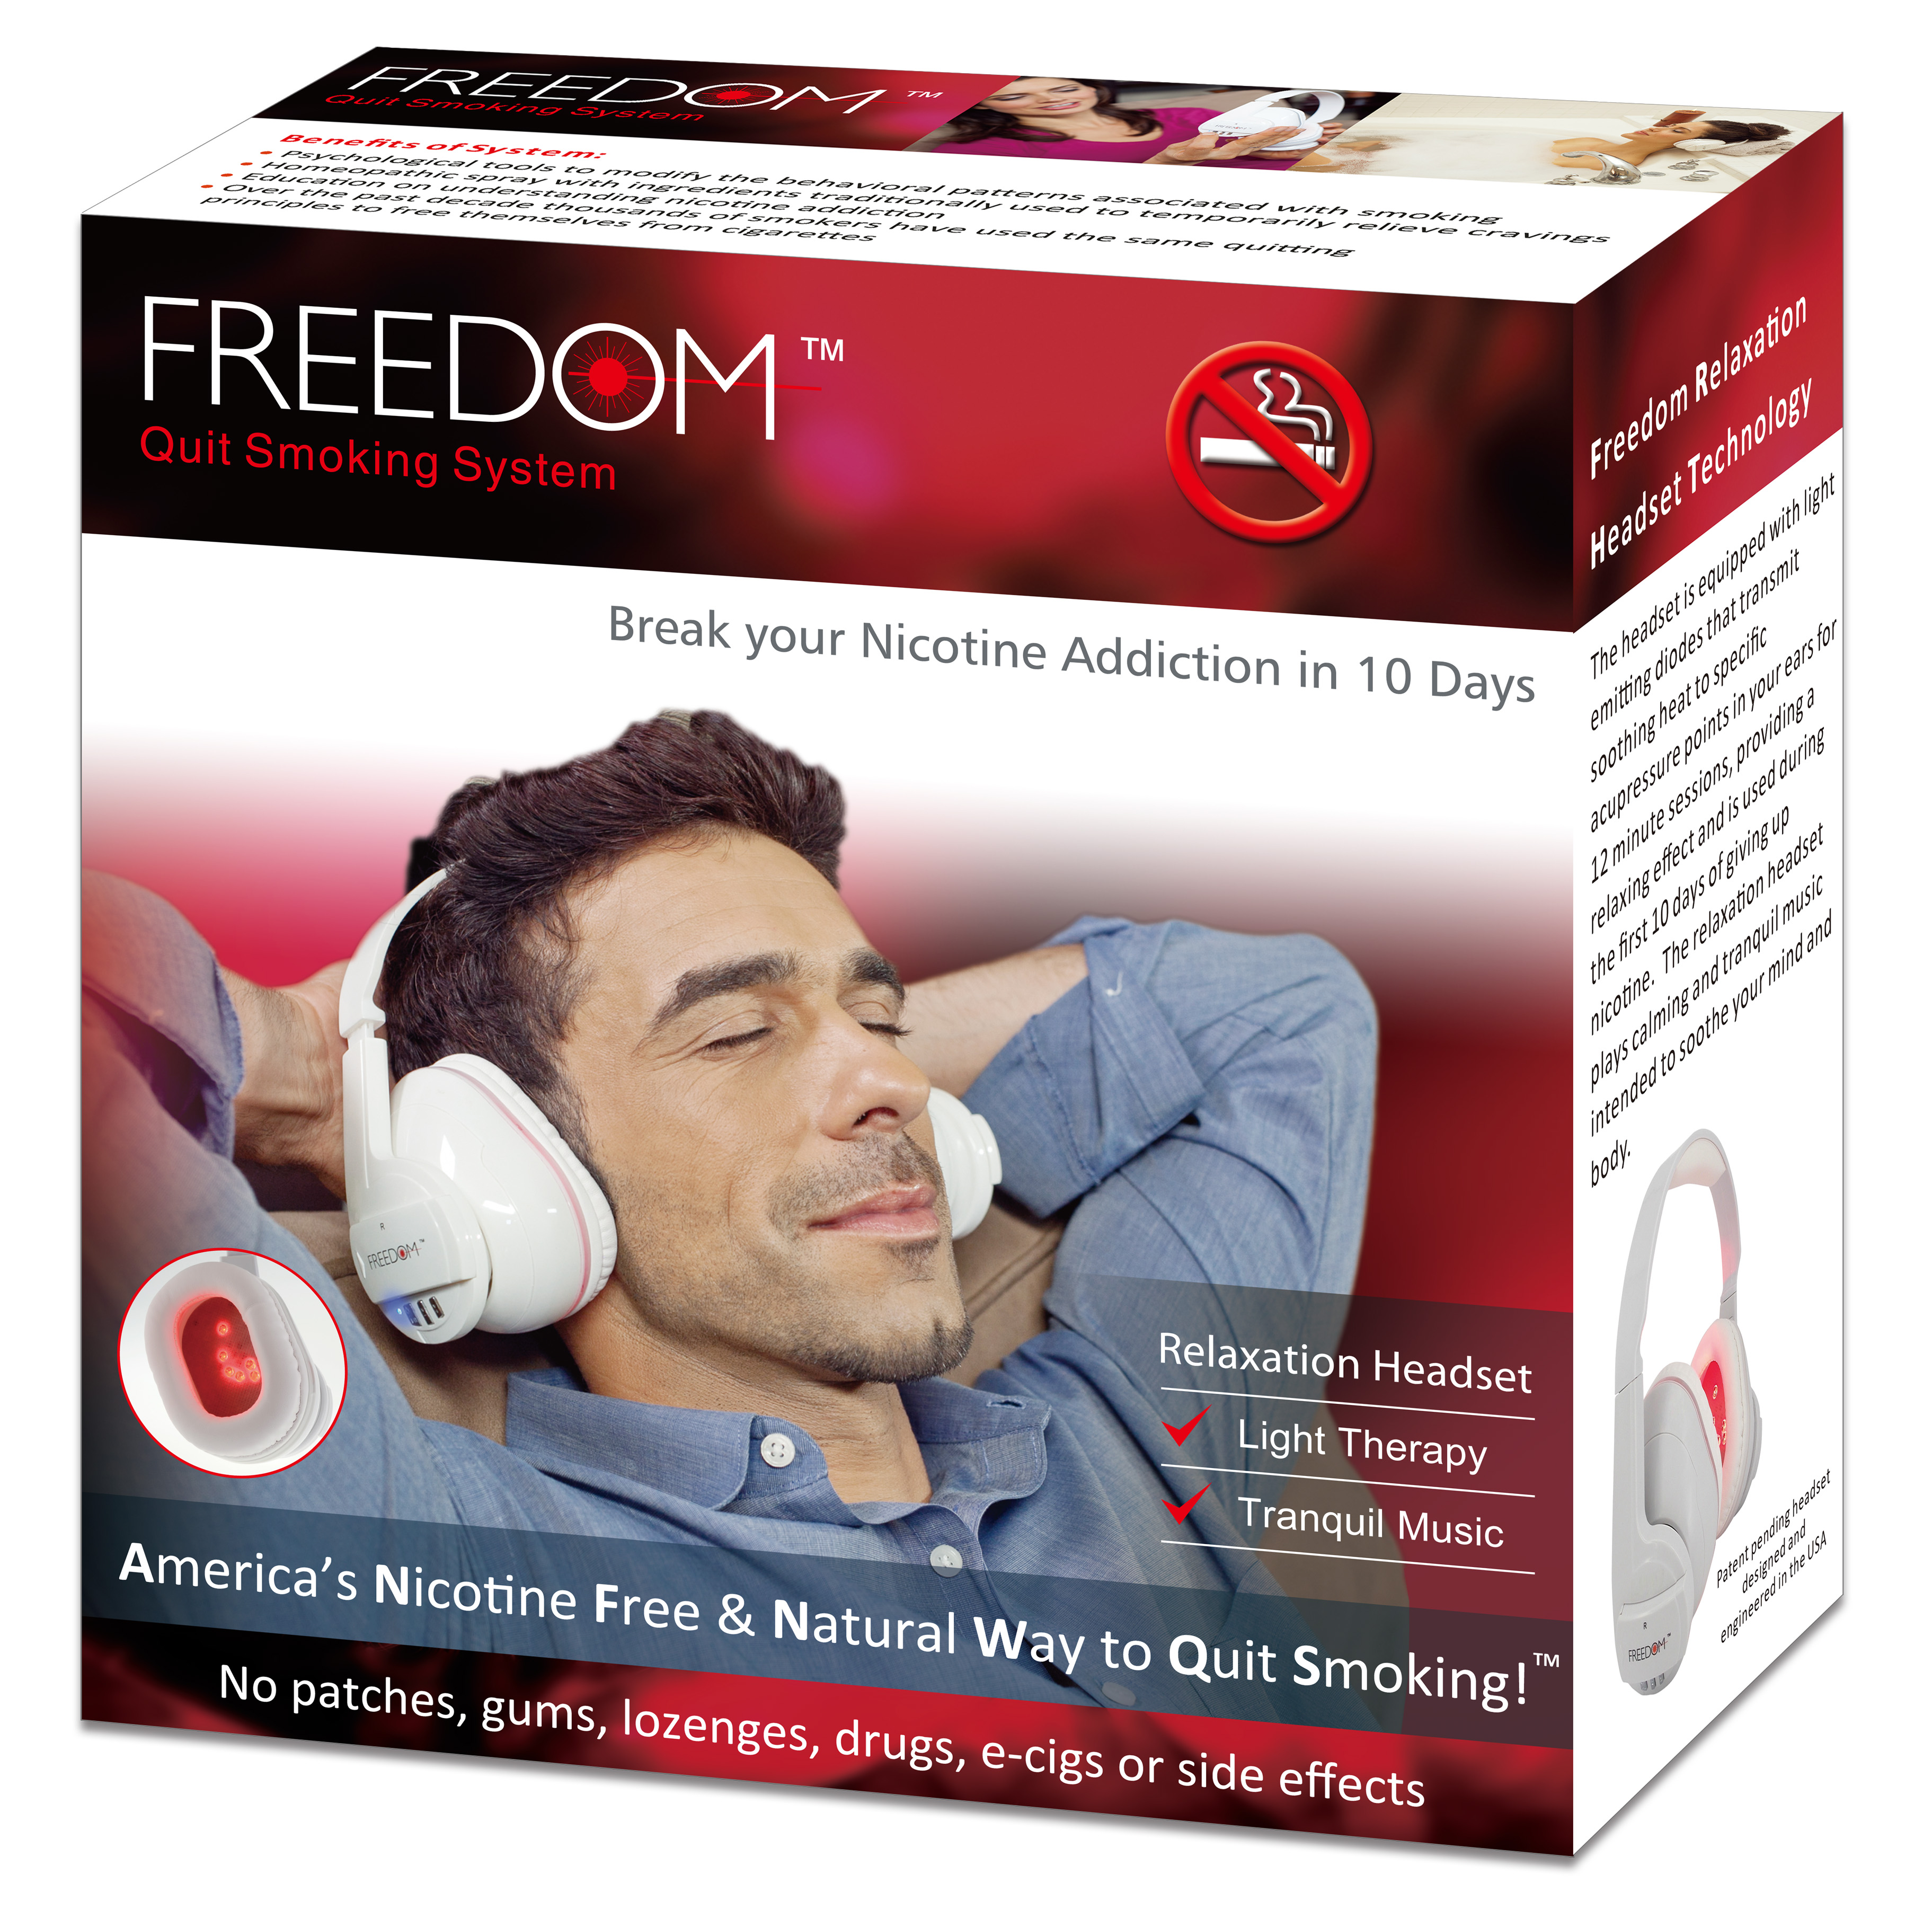 Freedom Quit Smoking System retail packaging